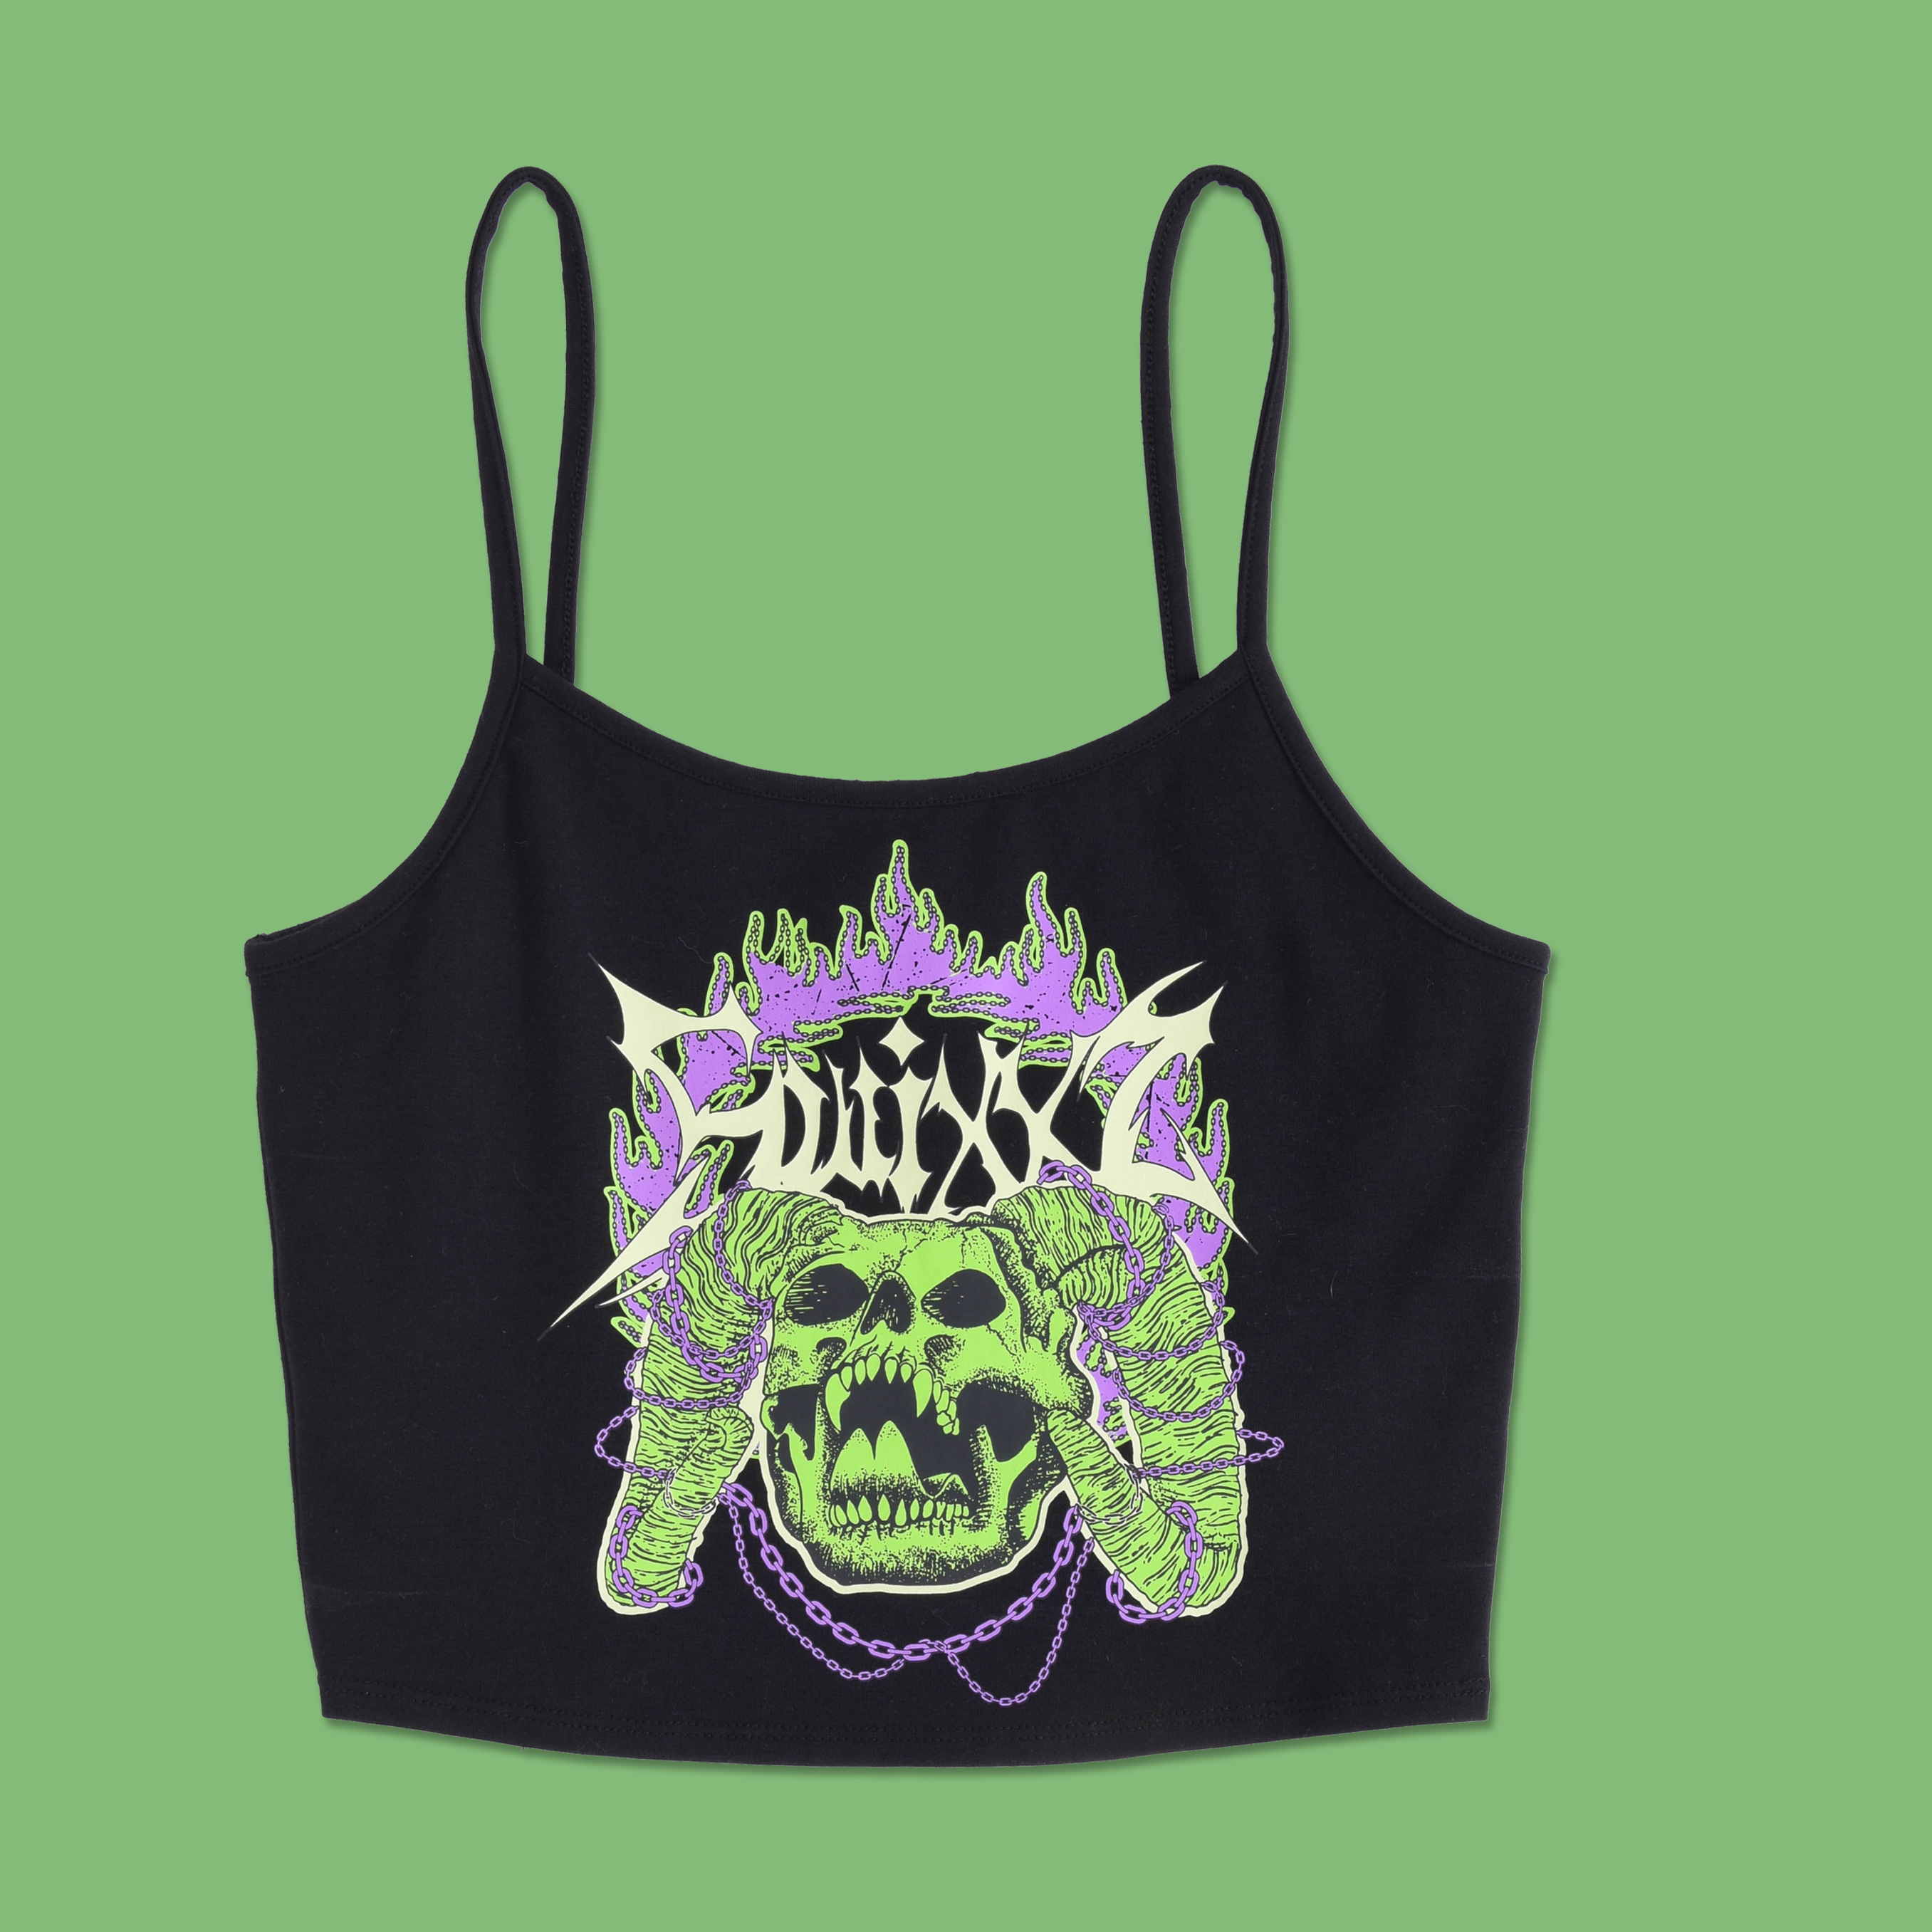 Raising Hell Tank Top from SWIXXZ by Maggie Lindemann - Front